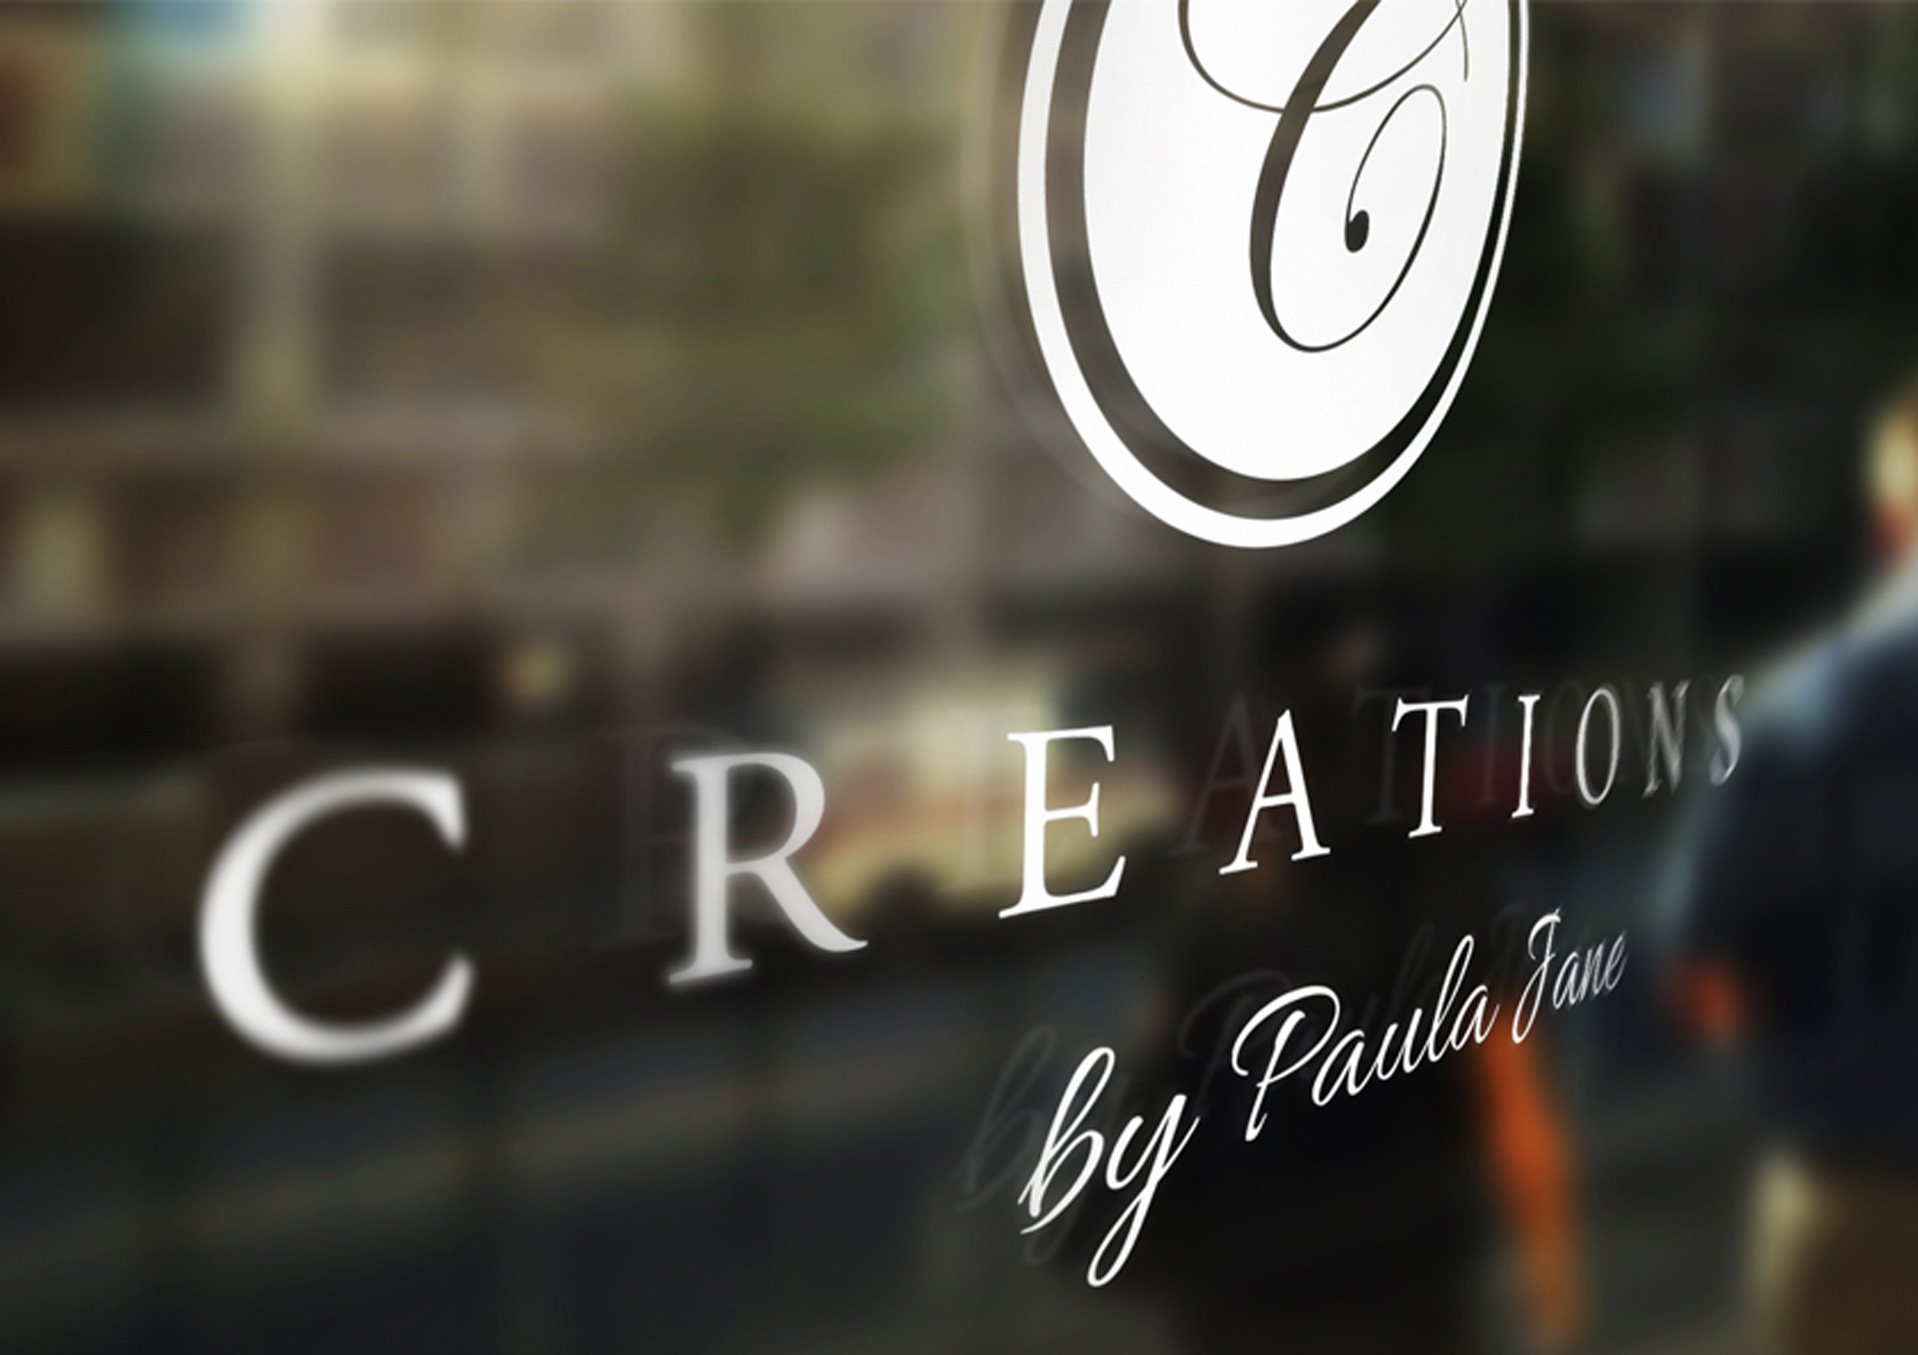 Creations re-brand